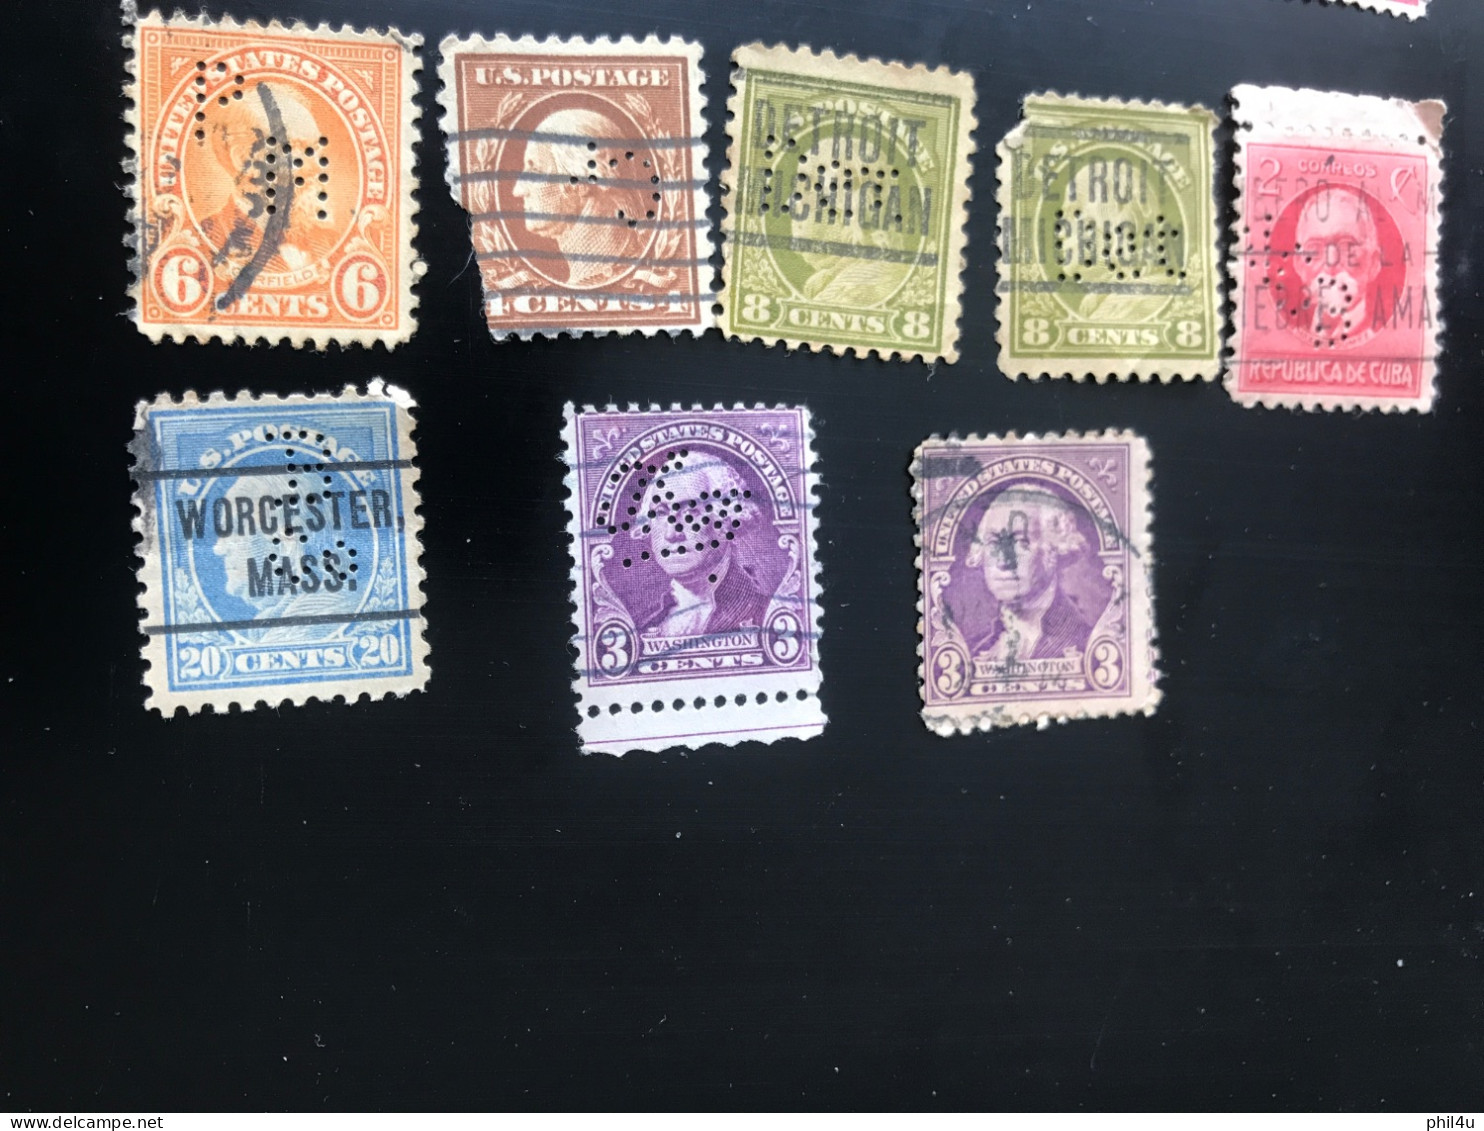 US 35+ lot used old stamps perfin with few stamps faults see scan